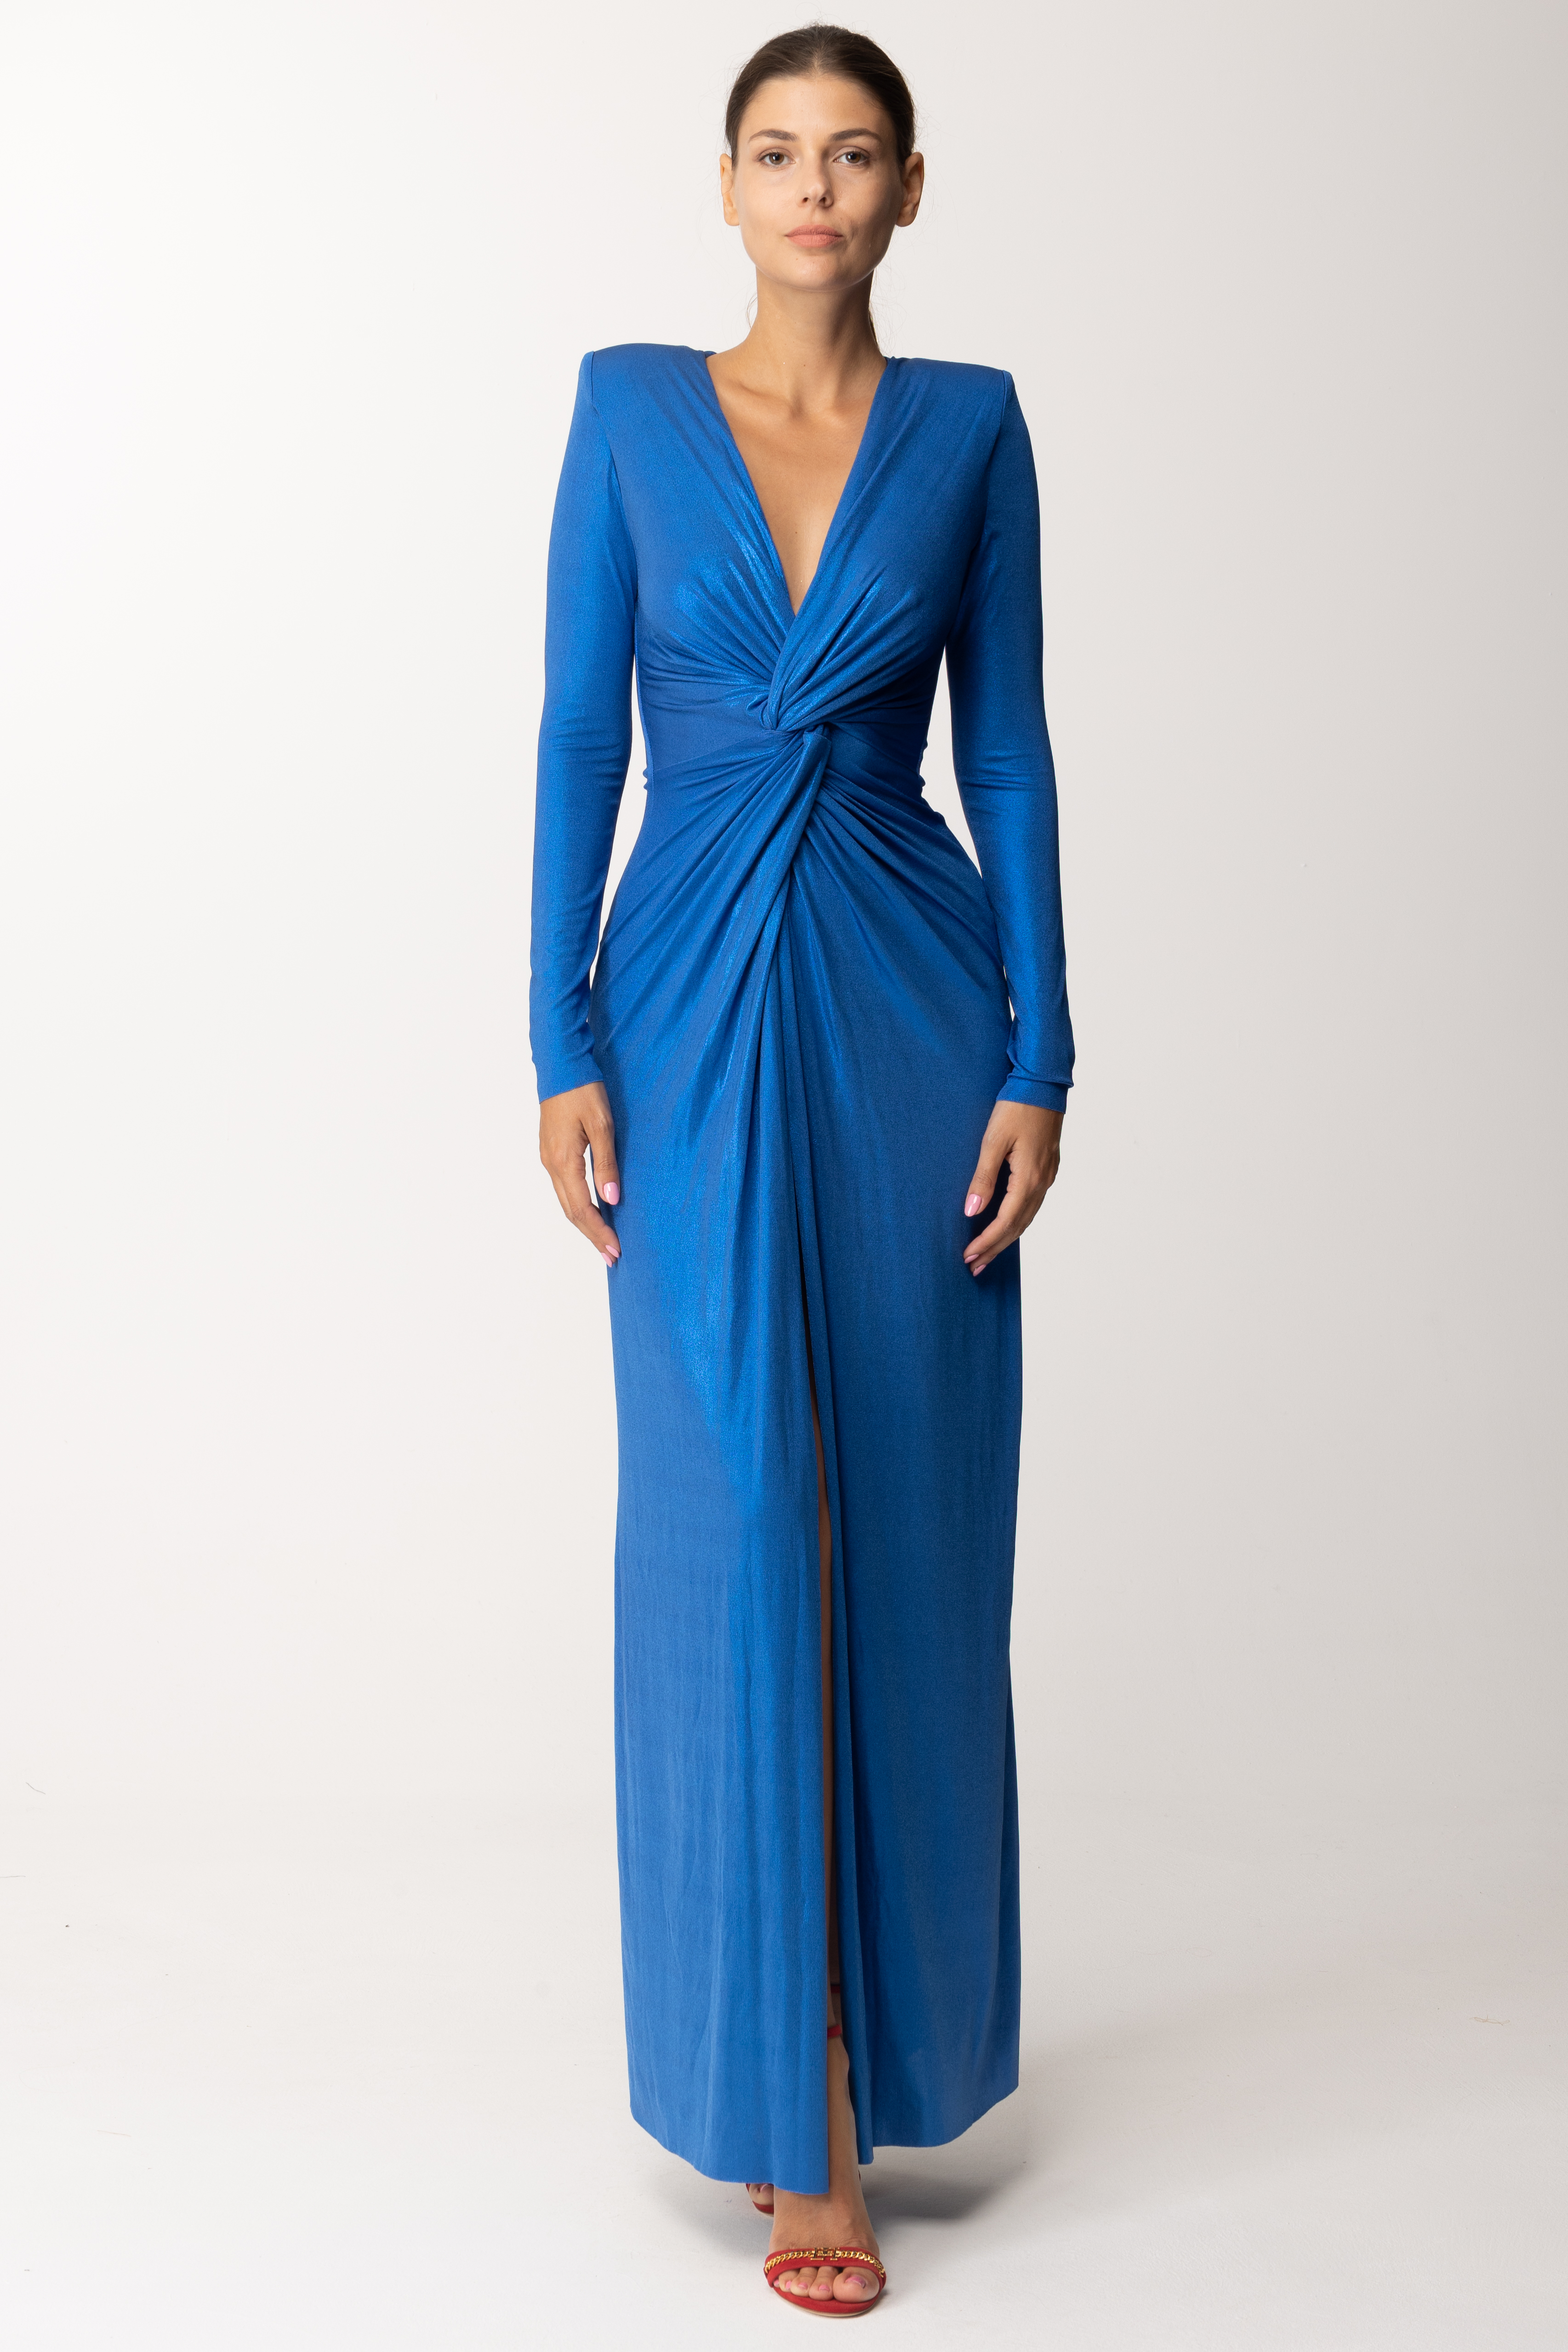 Preview: Dramèe Laminated Dress with Knot Blu